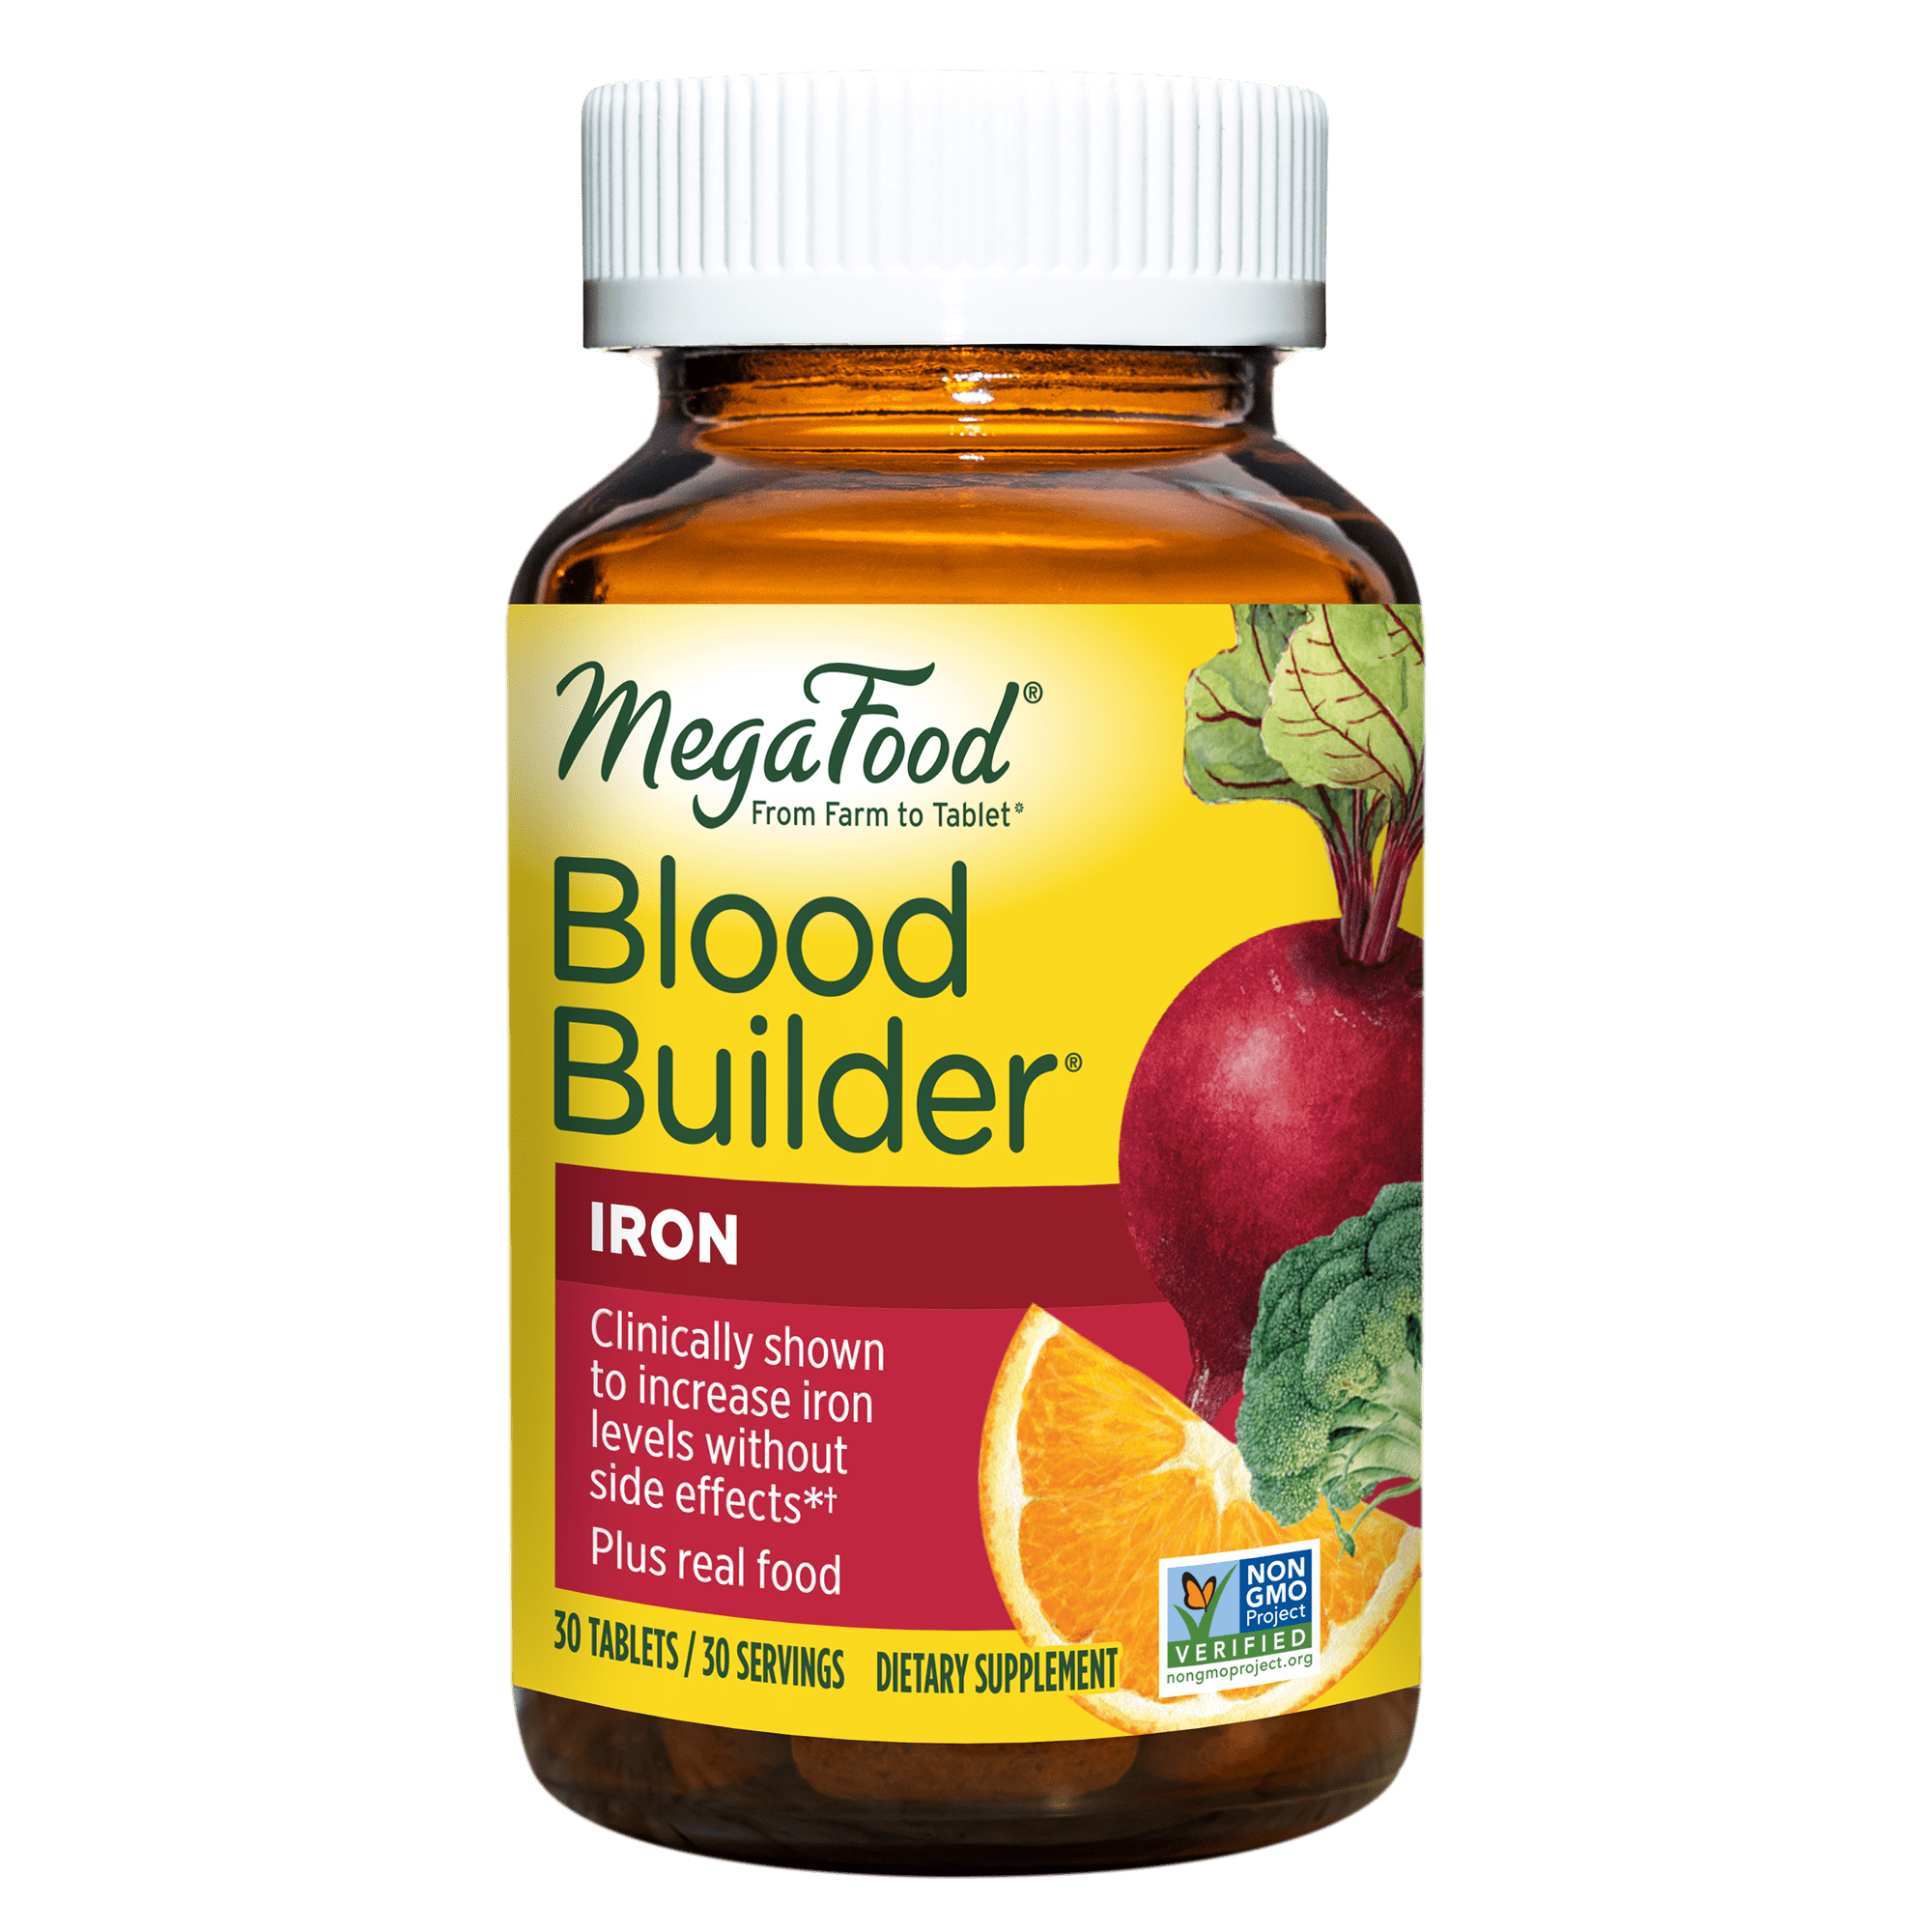 MegaFood Blood Builder - Iron Supplement Shown to Increase Iron Levels  without Nausea or Constipation - Energy Support with Iron, Vitamin B12, and  Folic Acid - Vegan - 30 Tabs 